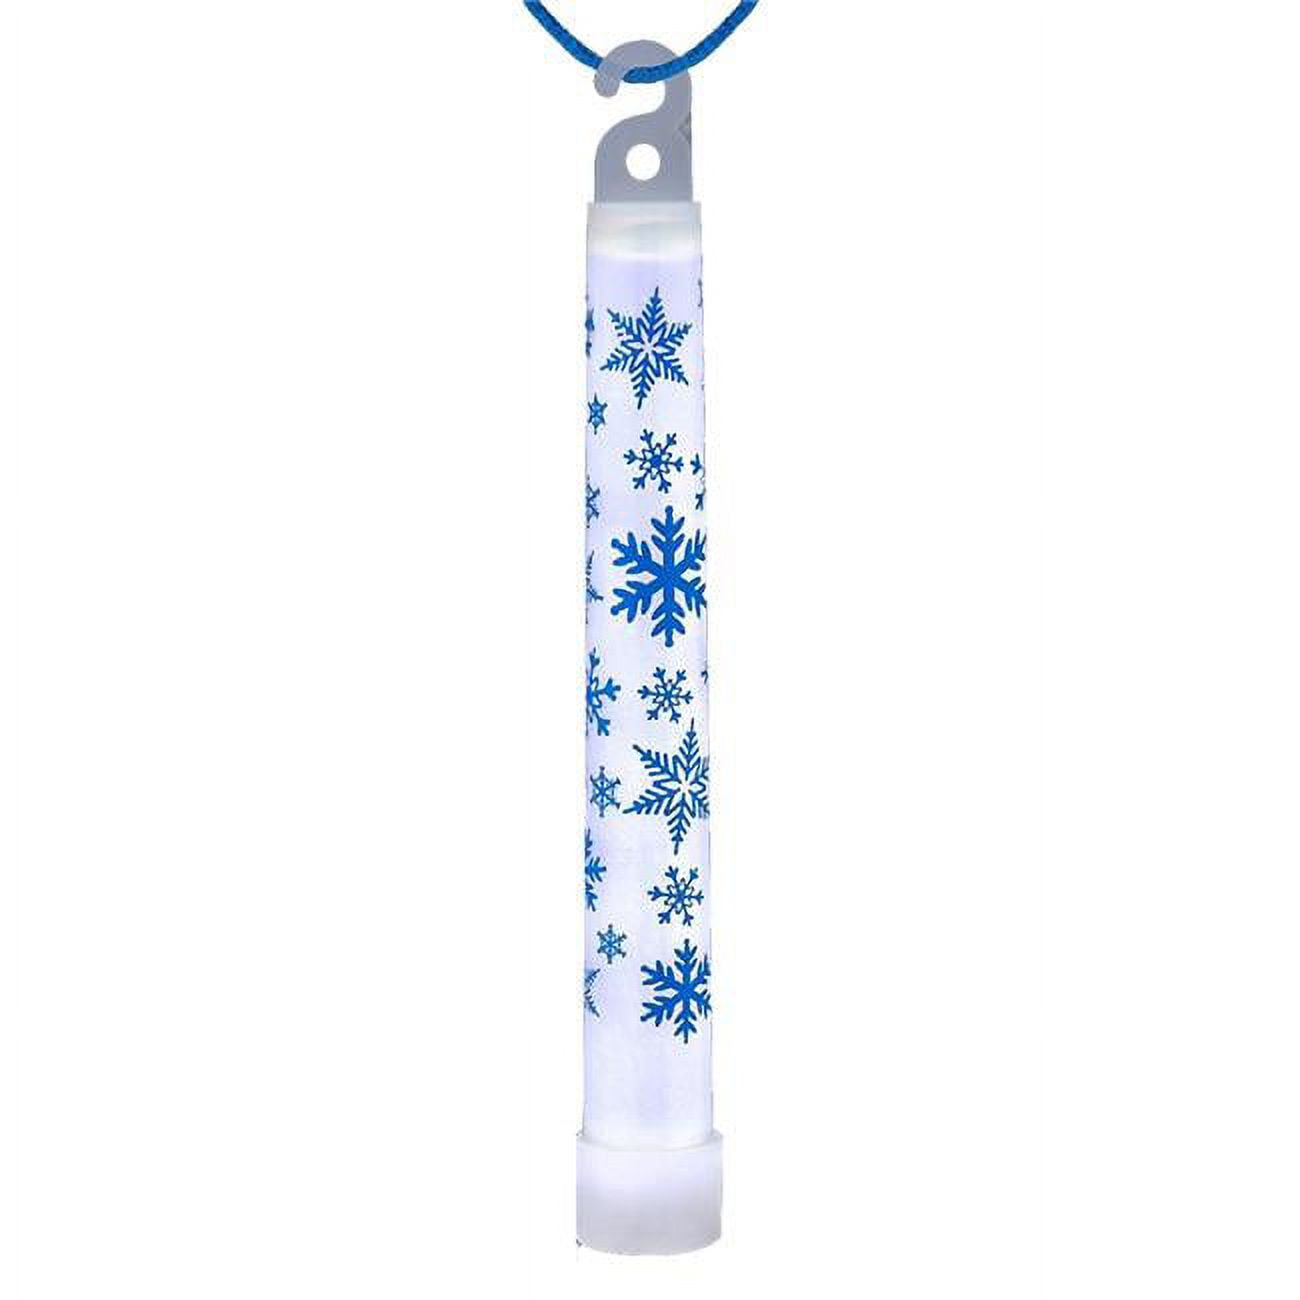 Picture of Blinkee 280081 6 in. Snowflake Glow Stick